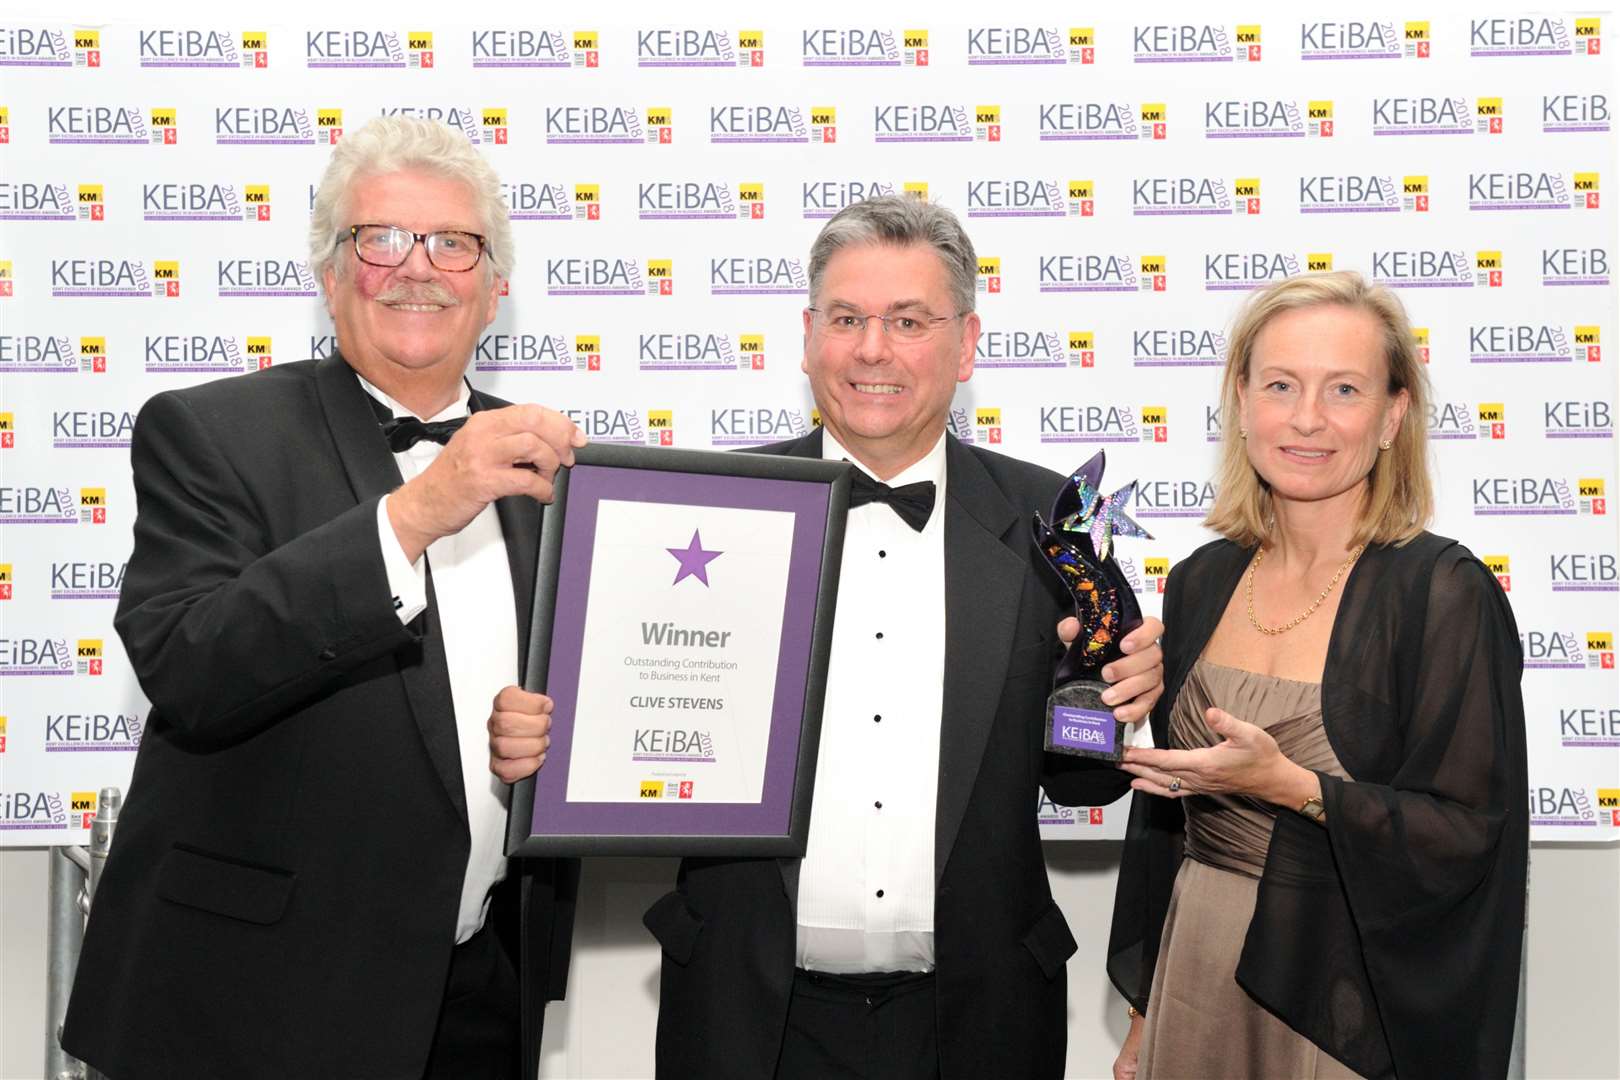 Clive Stevens, centre, wins the Outstanding Contribution to Business Award at KEiBA 2018 - flanked by KCC's Mark Dance, left, and the KM Media Group chairman Geraldine Allinson